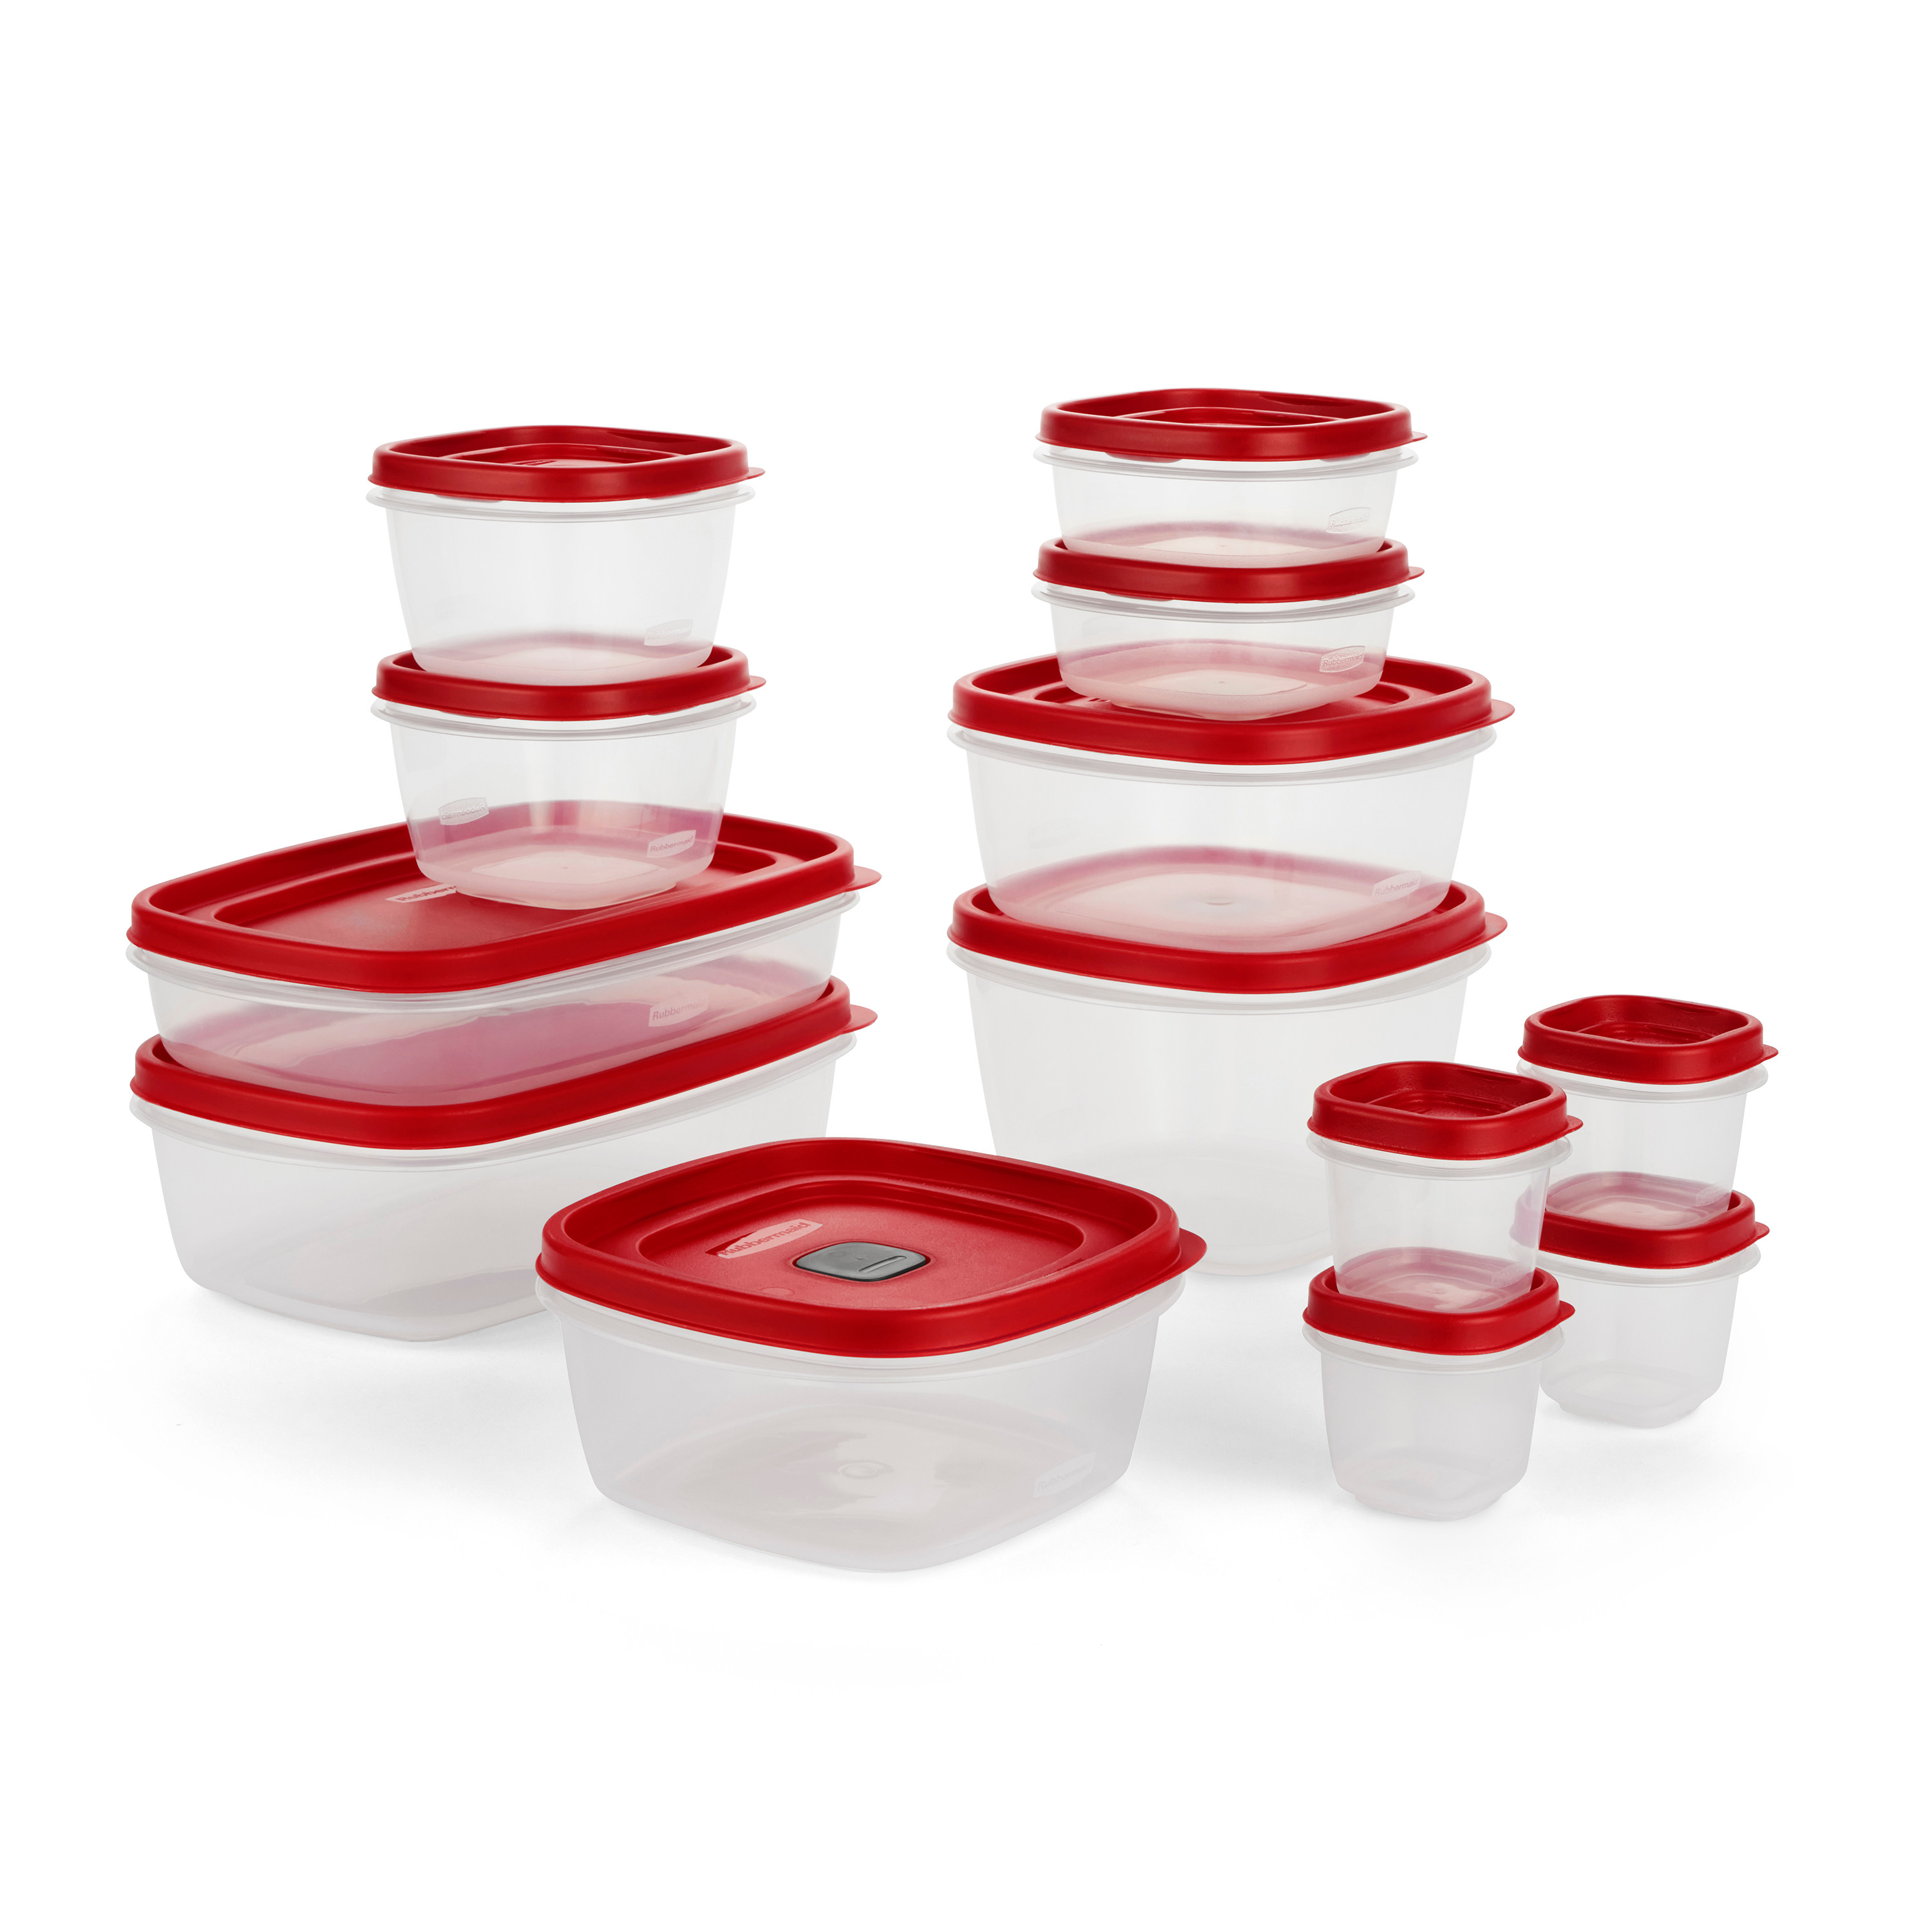 Rubbermaid EasyFindLids 26 Piece Plastic Food Storage Container Set with Vents, (39.5 Cup), Racer Red - image 6 of 9